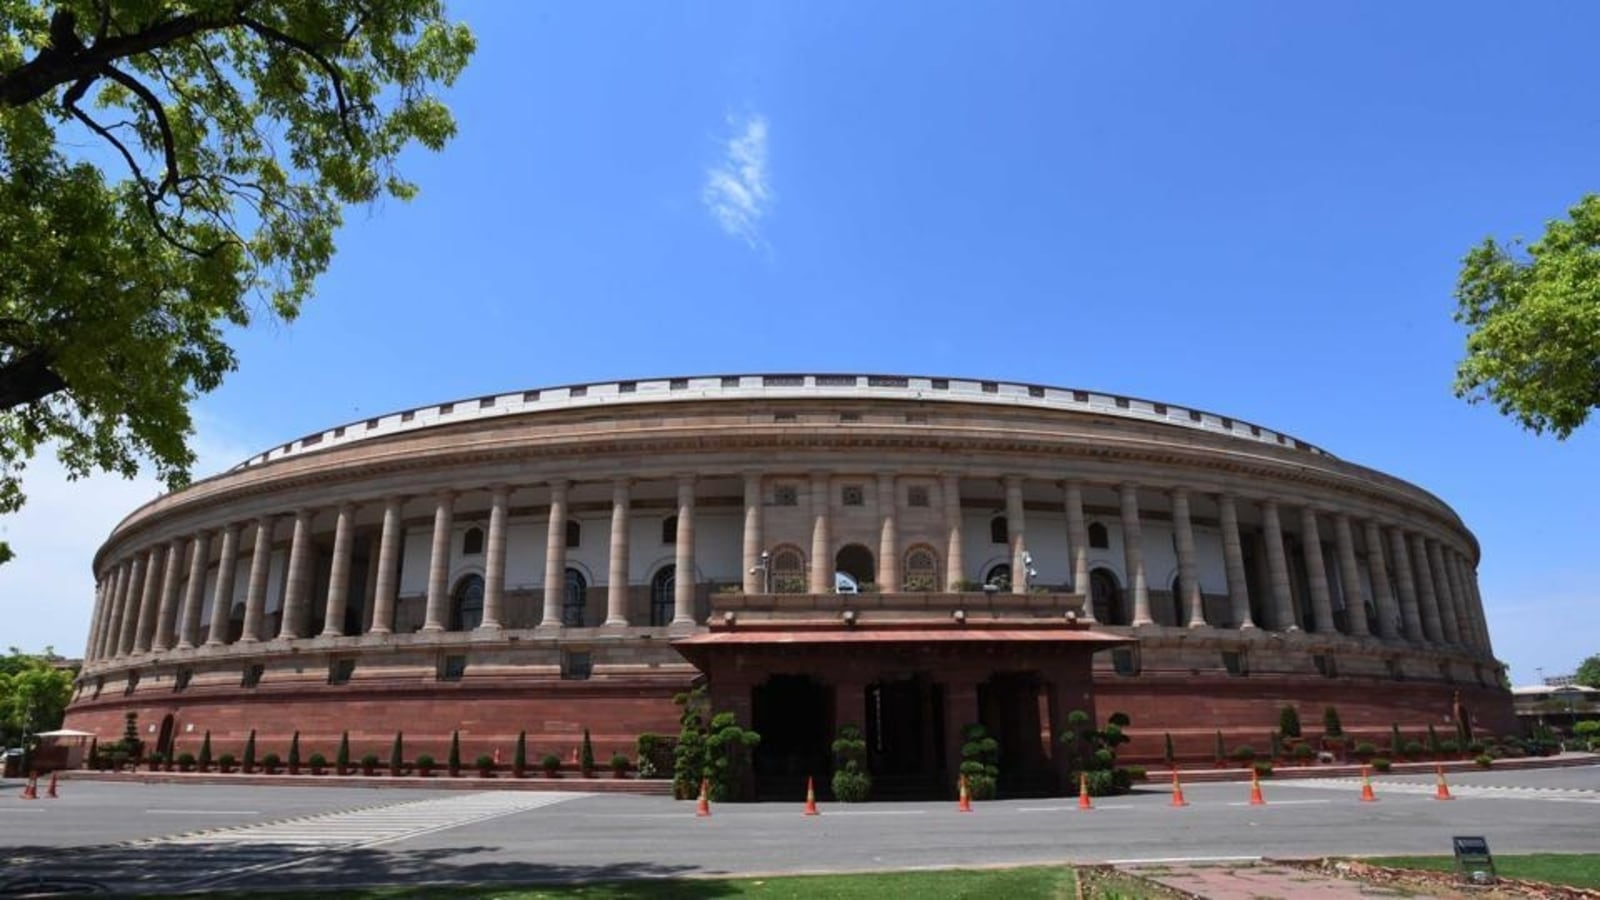 Amendment Bill on Welfare of Parents, Senior Citizens May be Discussed in  Winter Session - News18